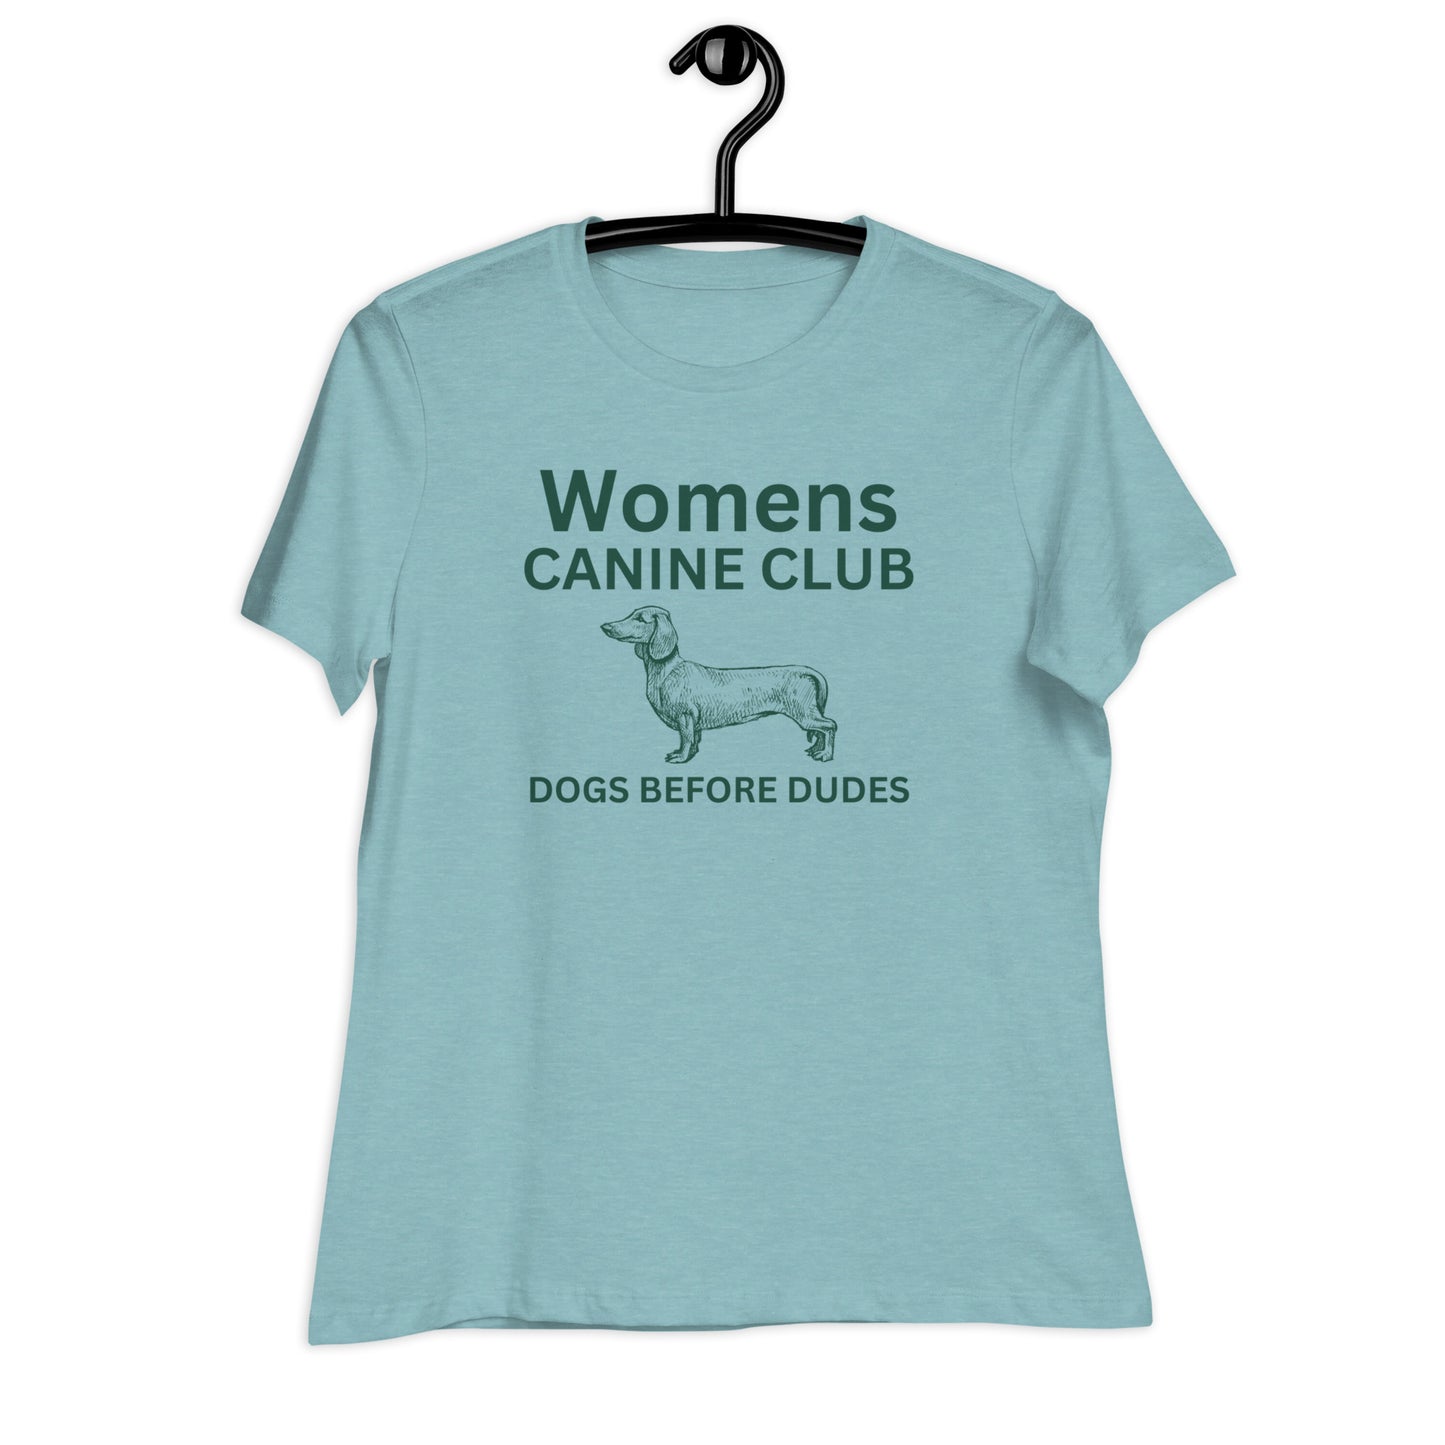 Canine Club Women's Relaxed T-Shirt